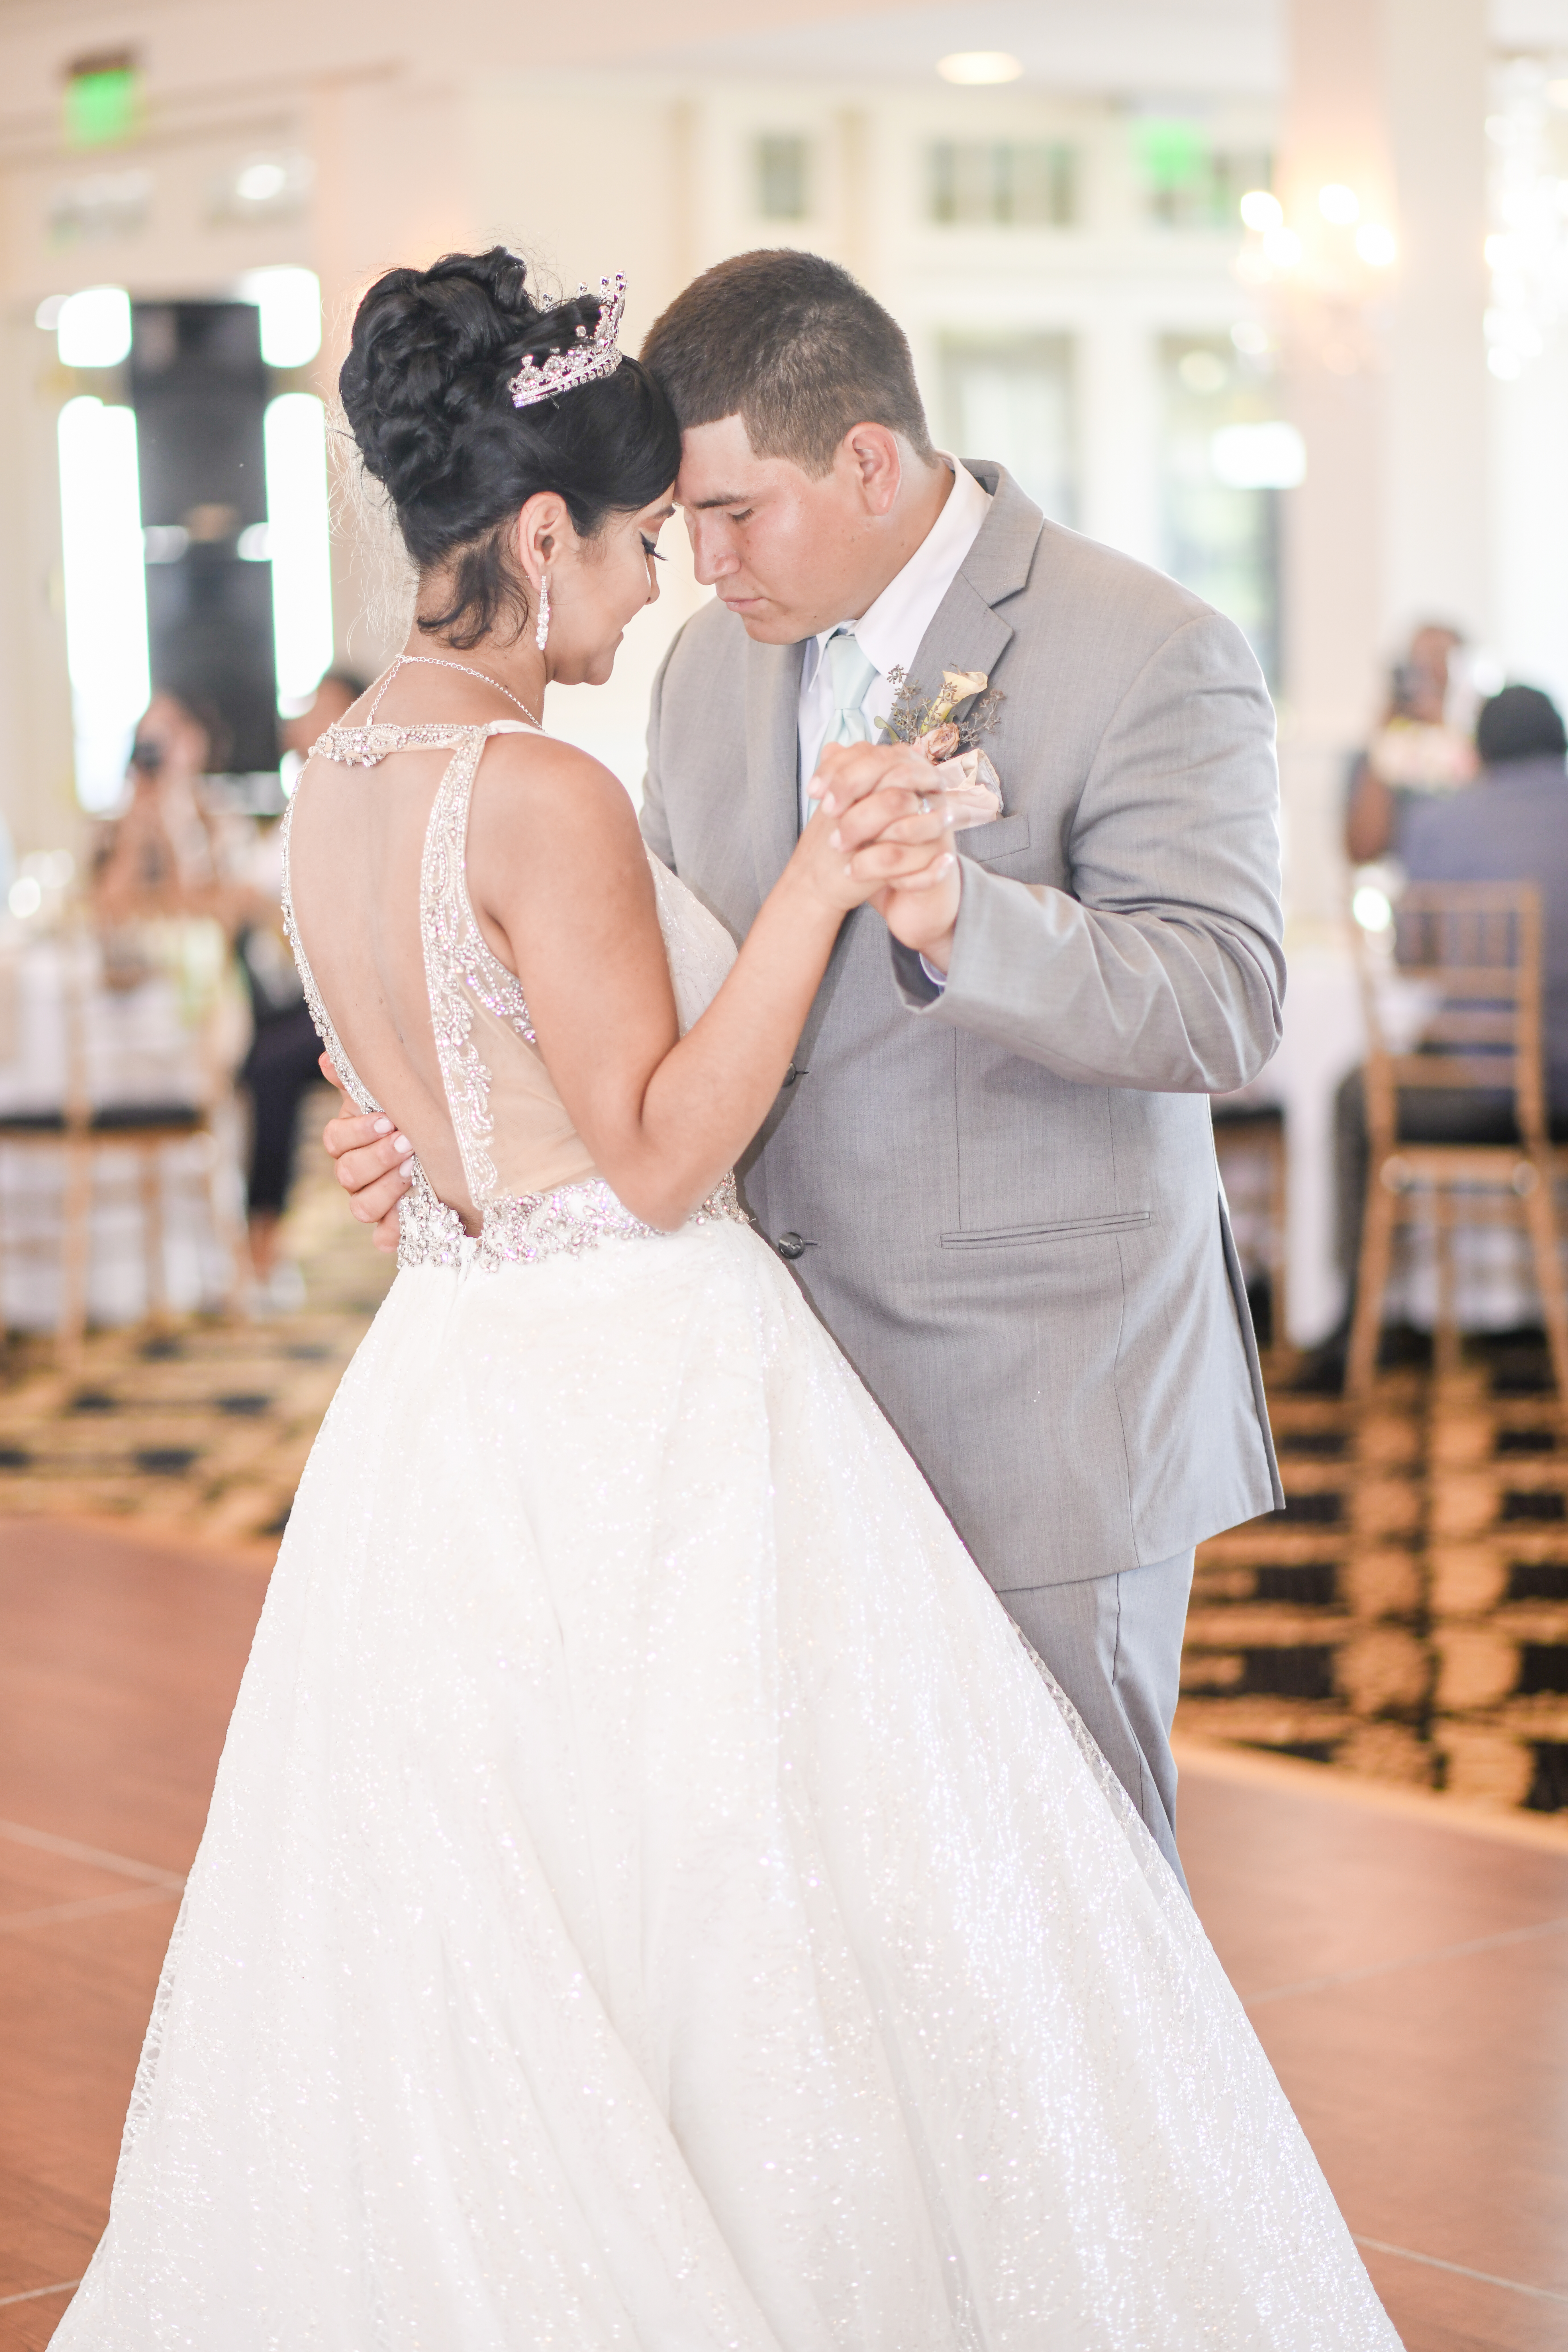 Couple share their first dance at their wedding